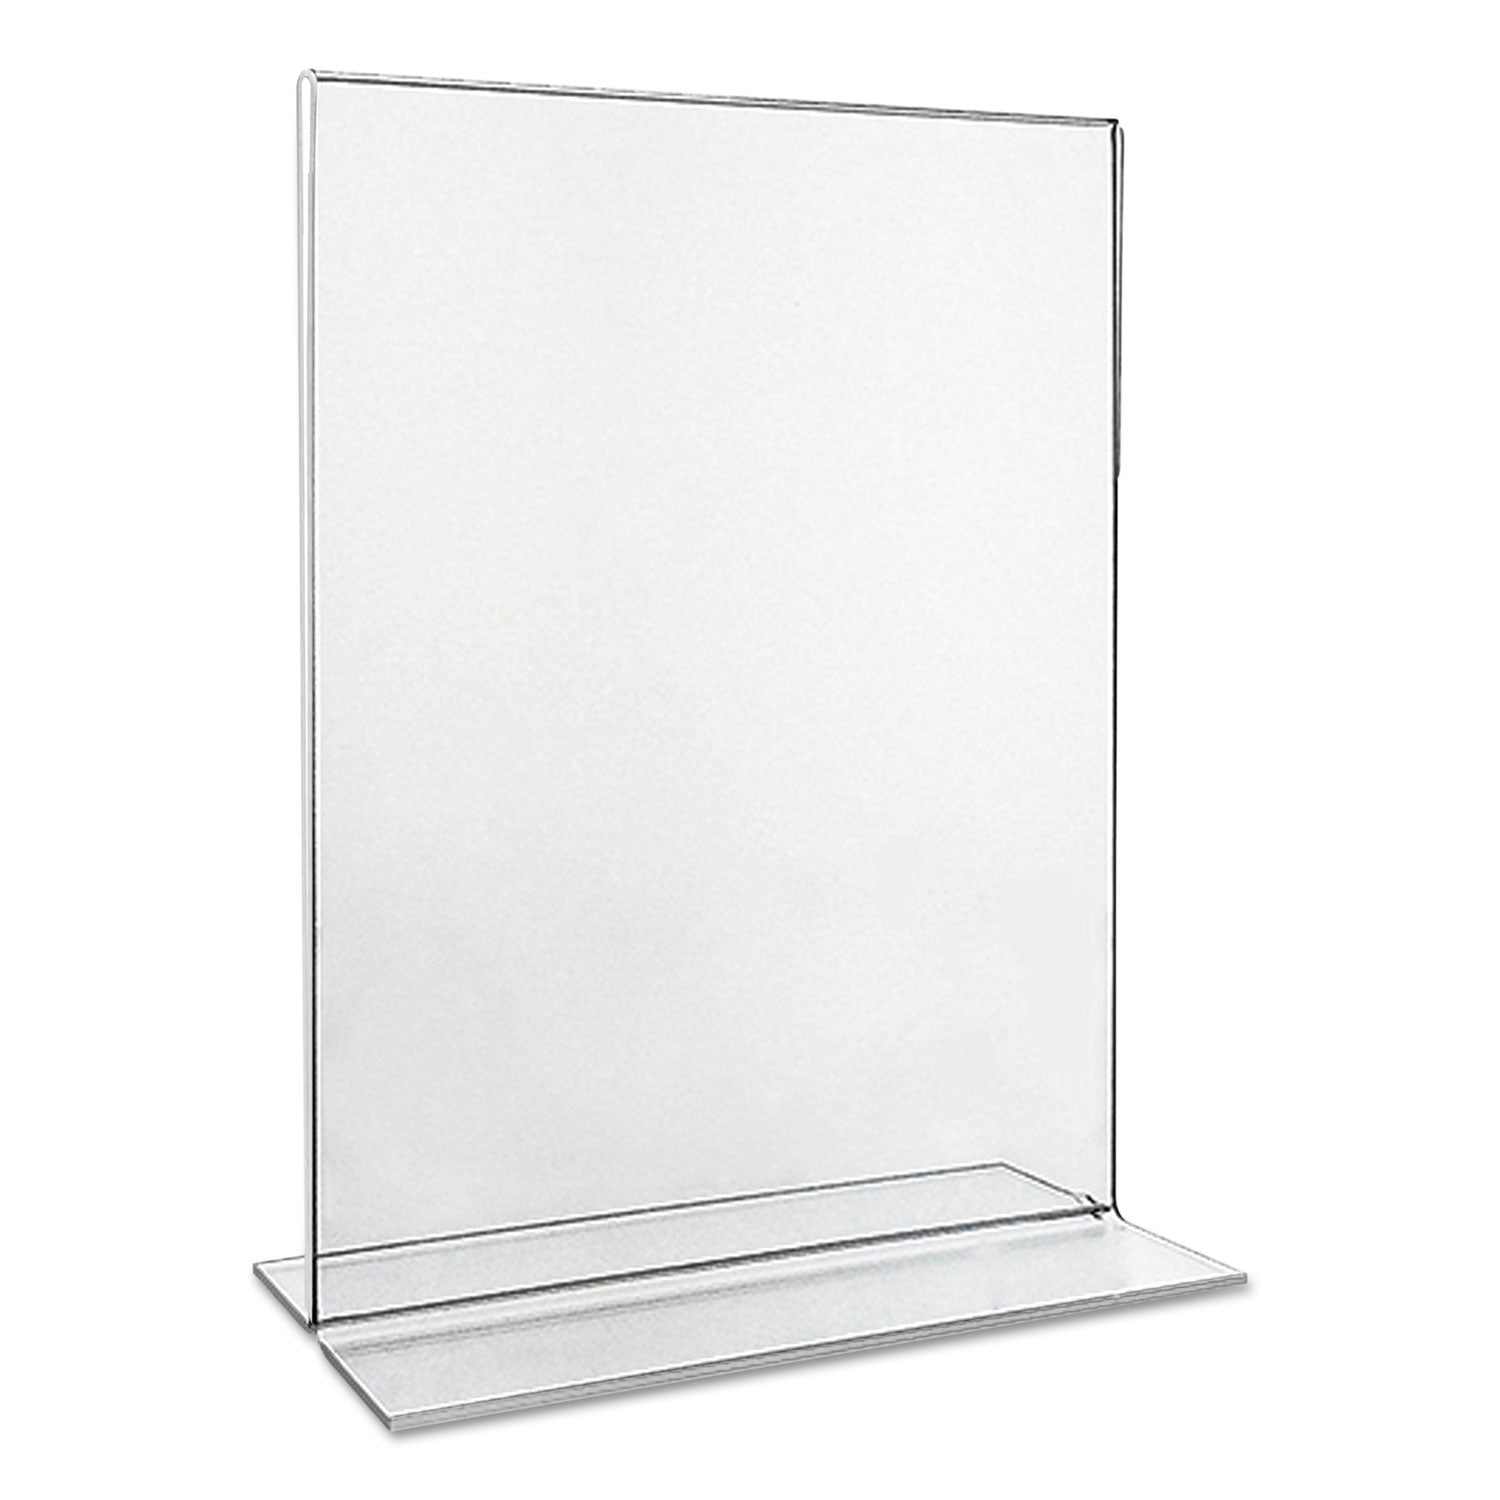 clear-2-sided-t-style-freestanding-frame-85-x-11-2-pack_unv76864 - 2